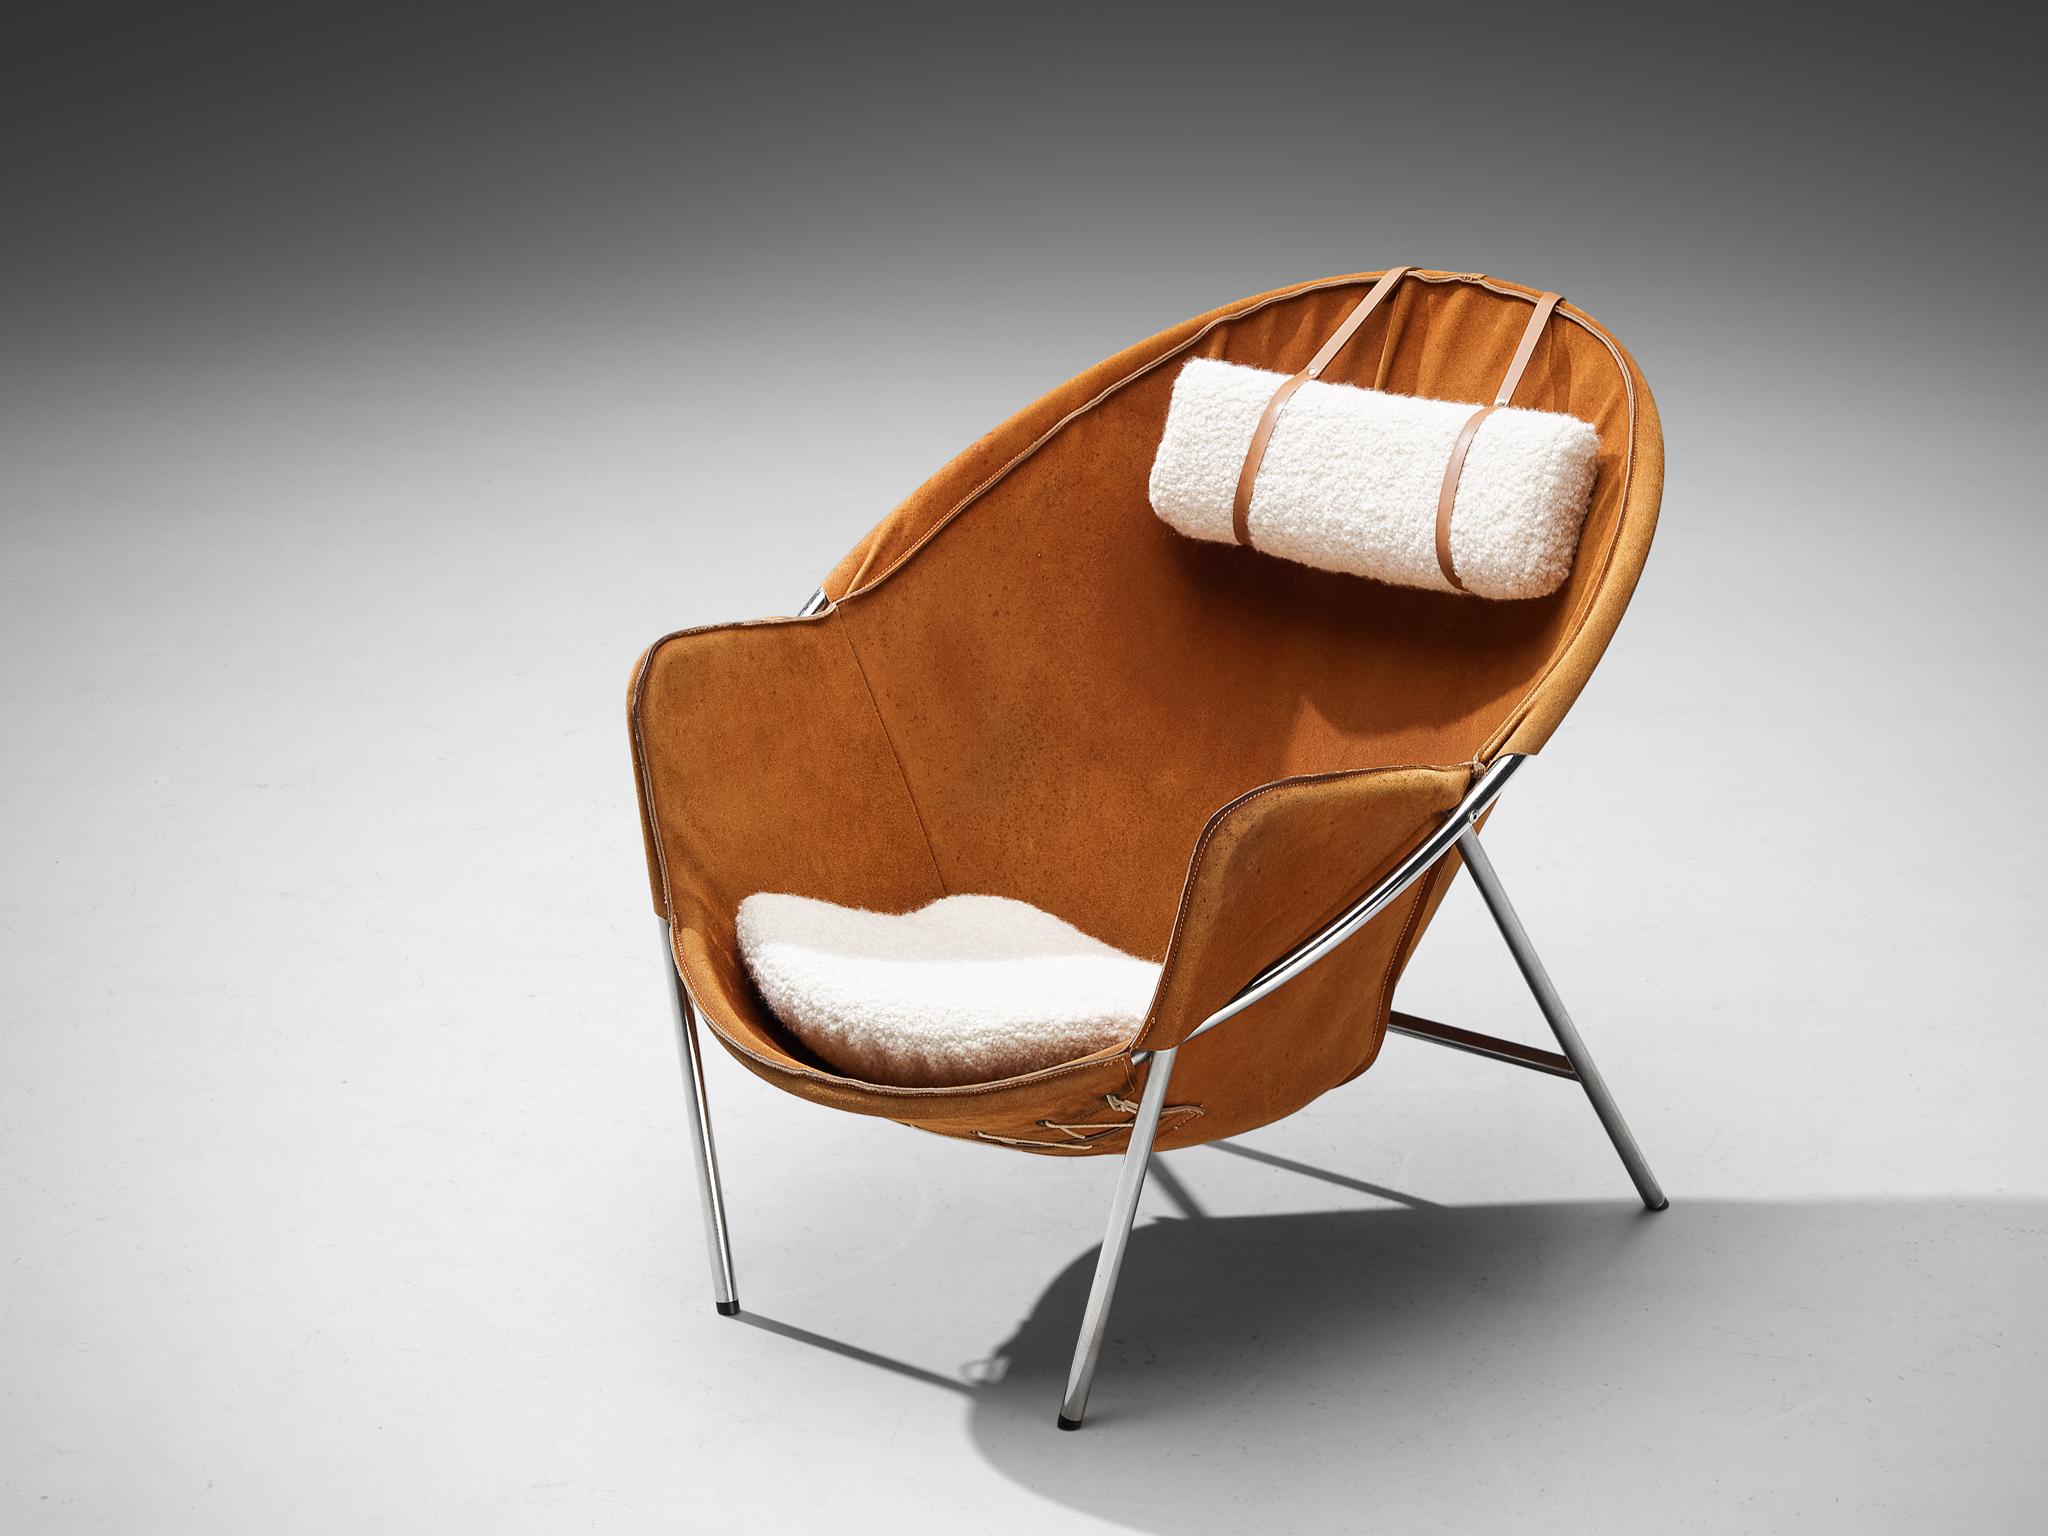 Erik Jørgensen, lounge chair model BO361, chromed metal, suede, wool, rope, brass, Denmark, design 1953

This design by Erik Jørgensen epitomizes a splendid construction featuring a ball-shaped seating that is attached to a stabile frame in